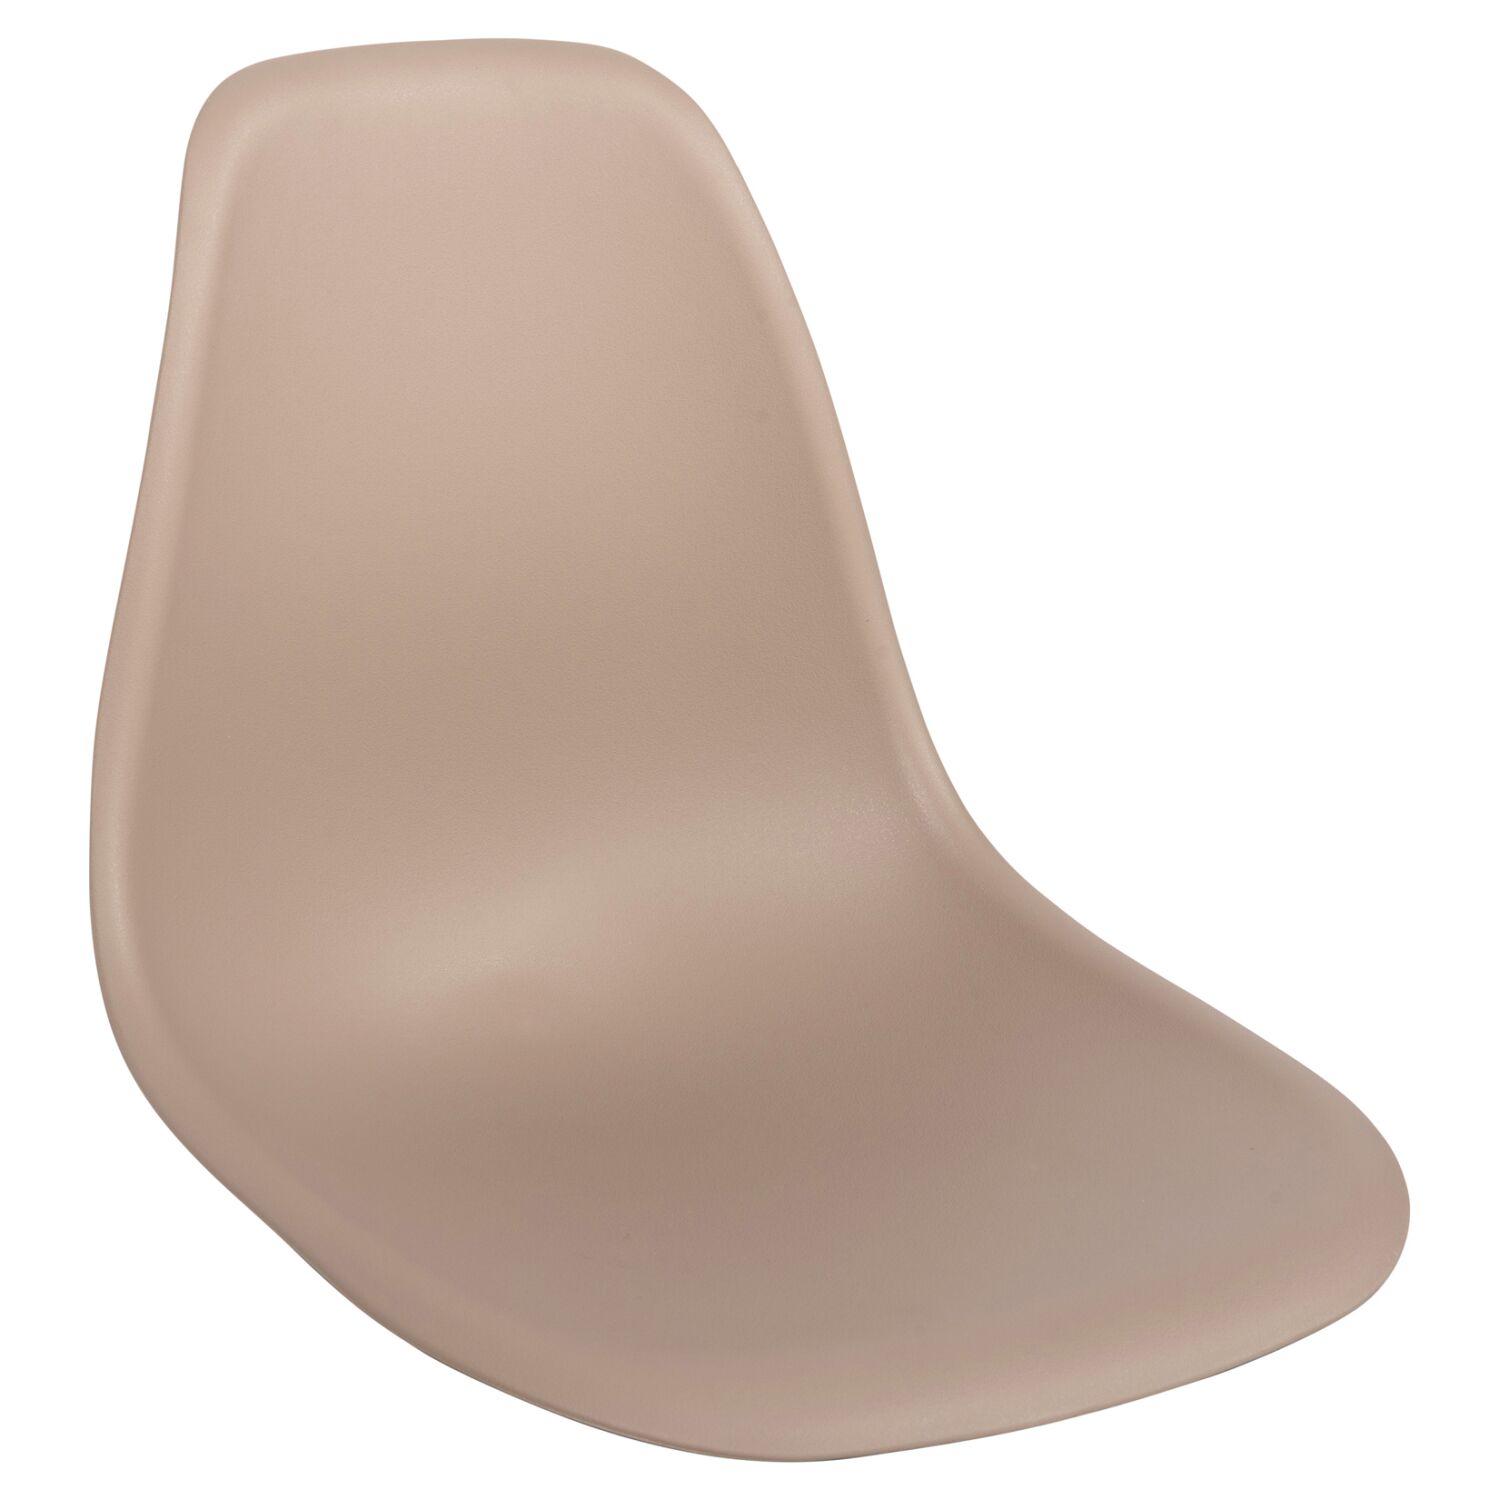 REPLACEMENT SEAT FOR DINING CHAIR TWIST HM8460.25 CAPPUCCINO PP